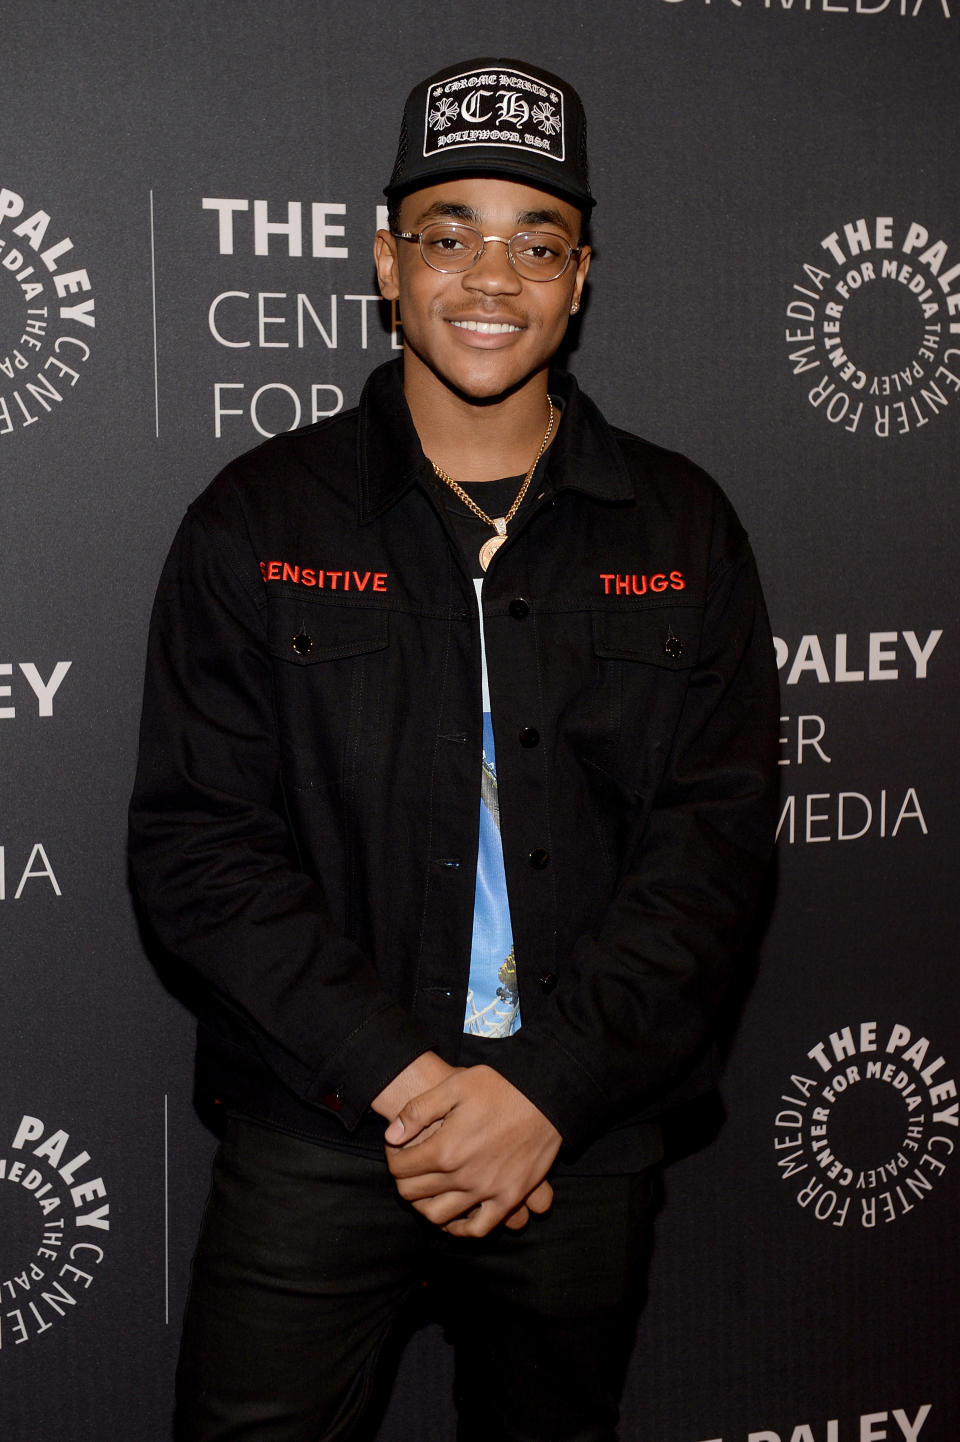 Michael Rainey Jr. attends the Power Series Finale Episode Screening at Paley Center on February 07, 2020 in New York City